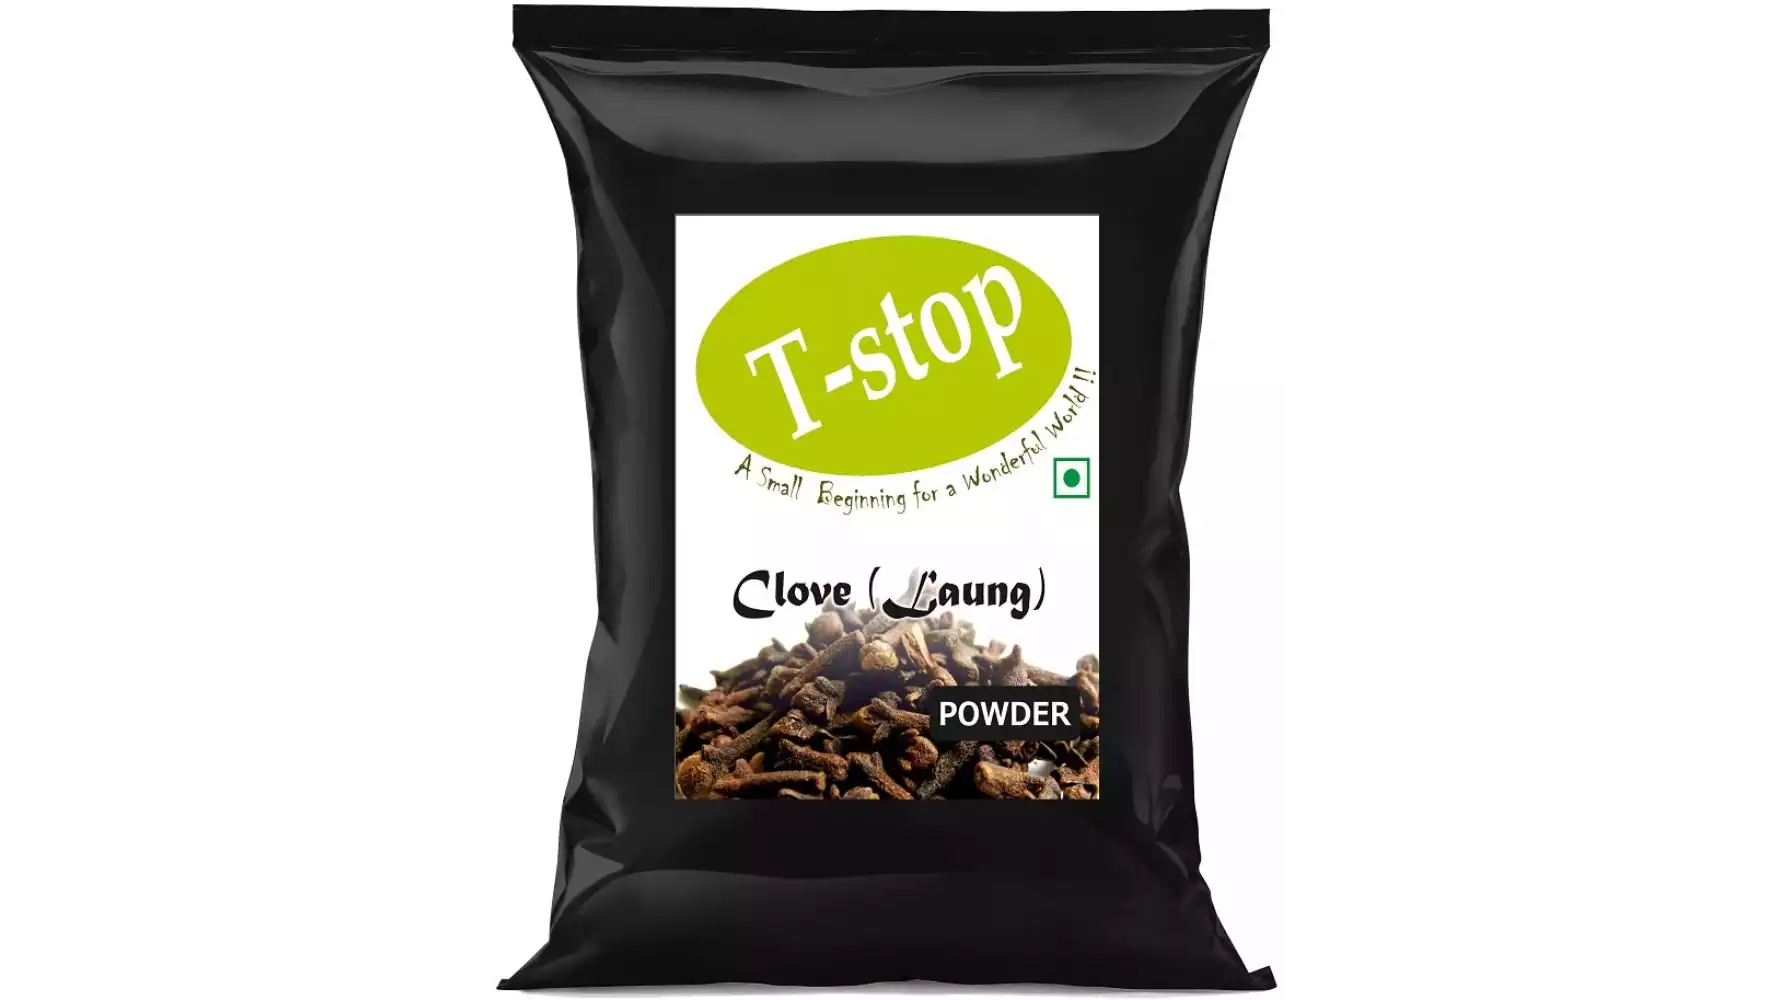 T-stop Clove Powder (Laung/Laving) (25g, Pack of 2)